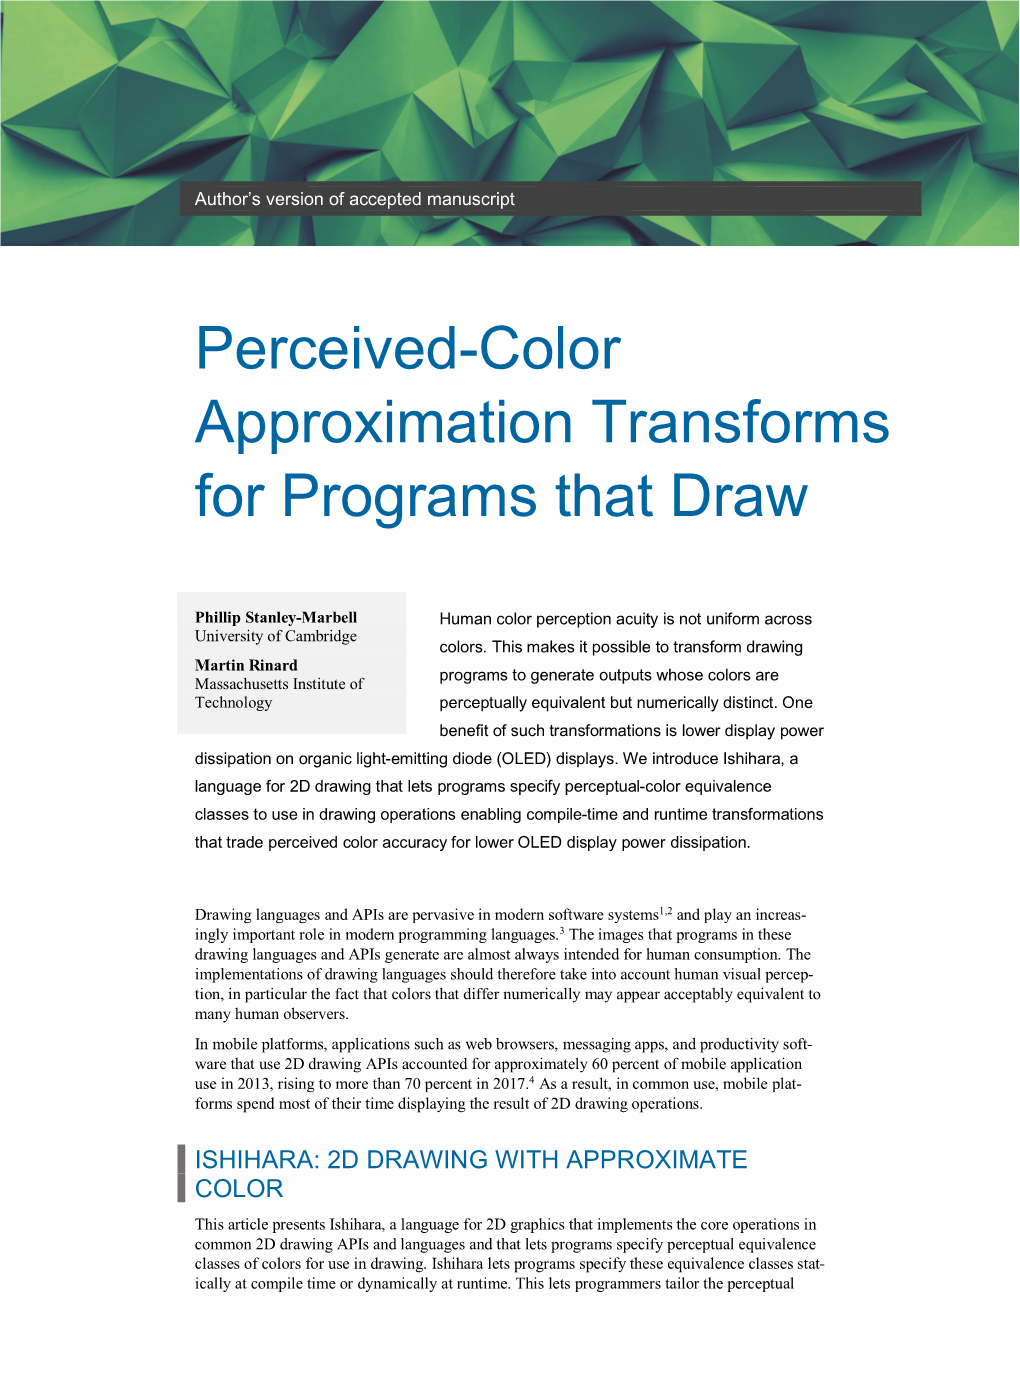 Perceived-Color Approximation Transforms for Programs That Draw